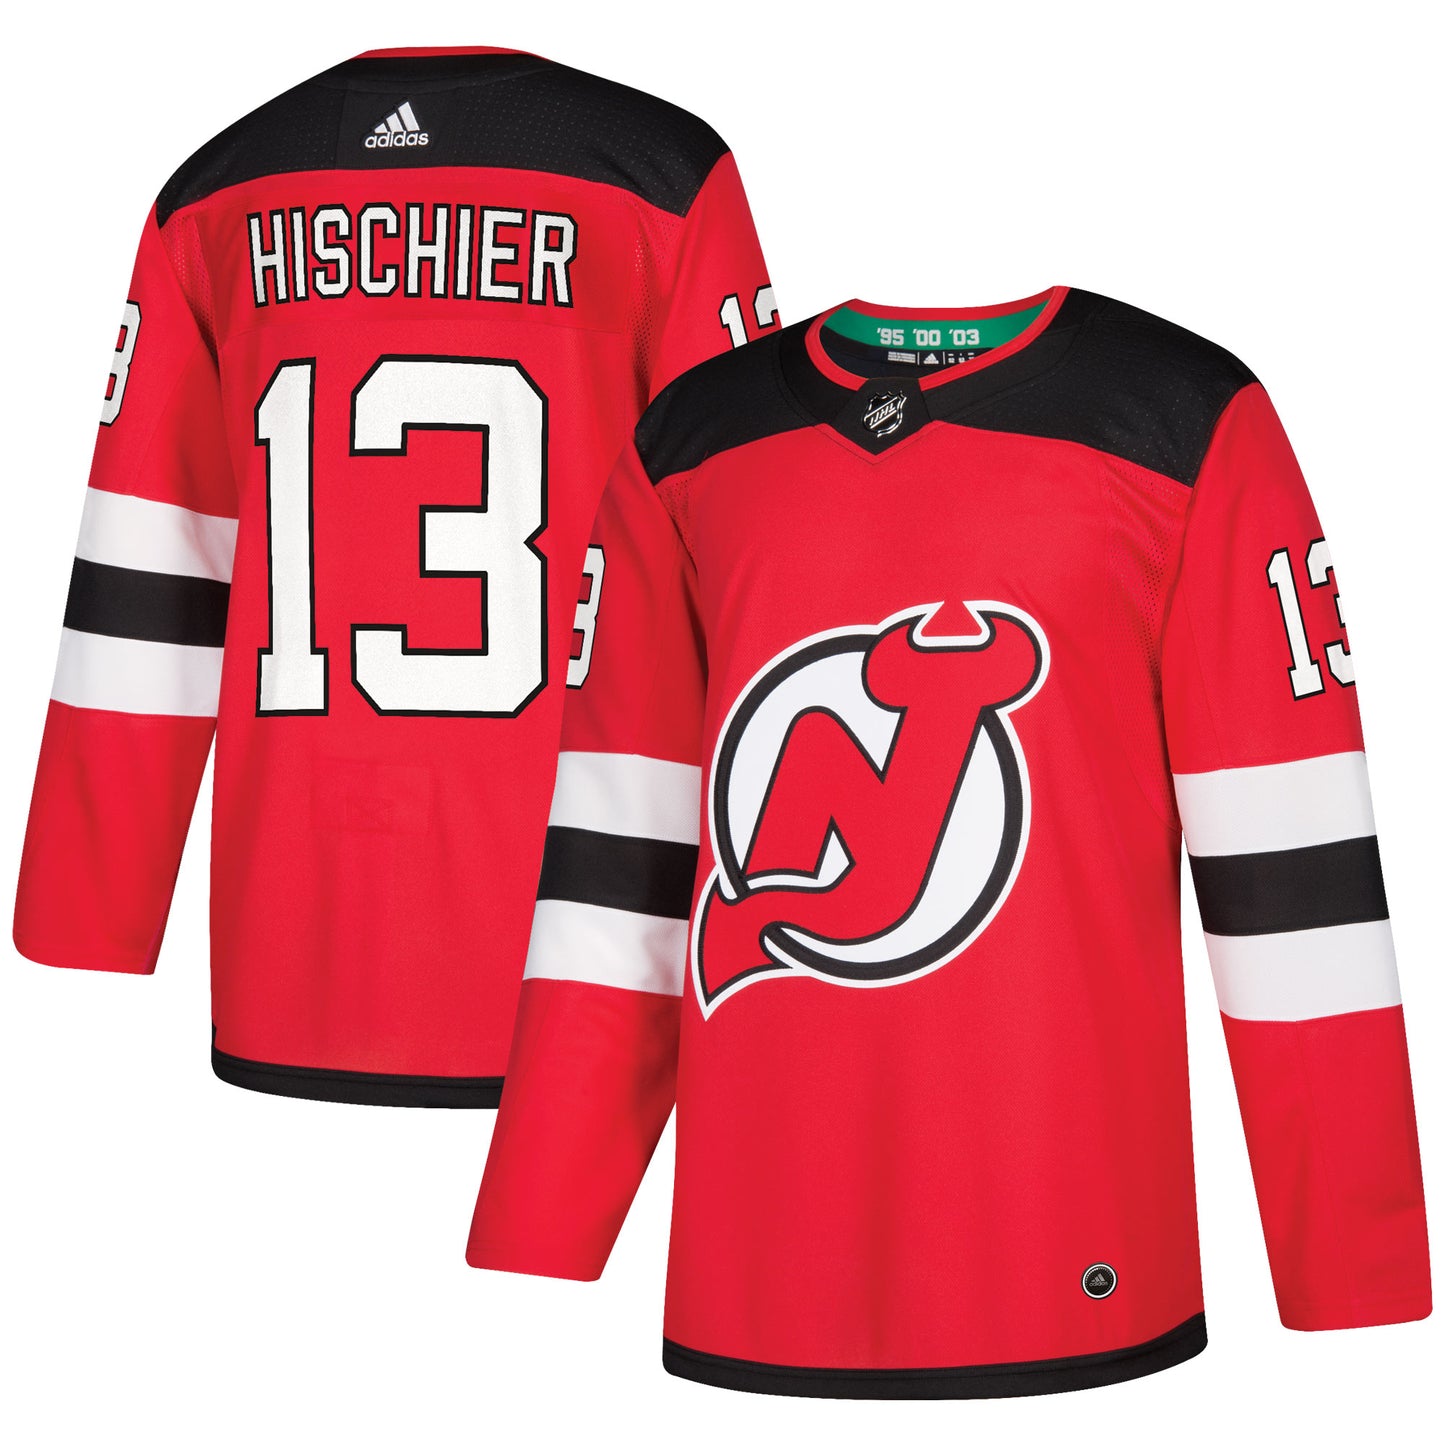 Nico Hischier New Jersey Devils adidas Authentic Player Jersey - Red